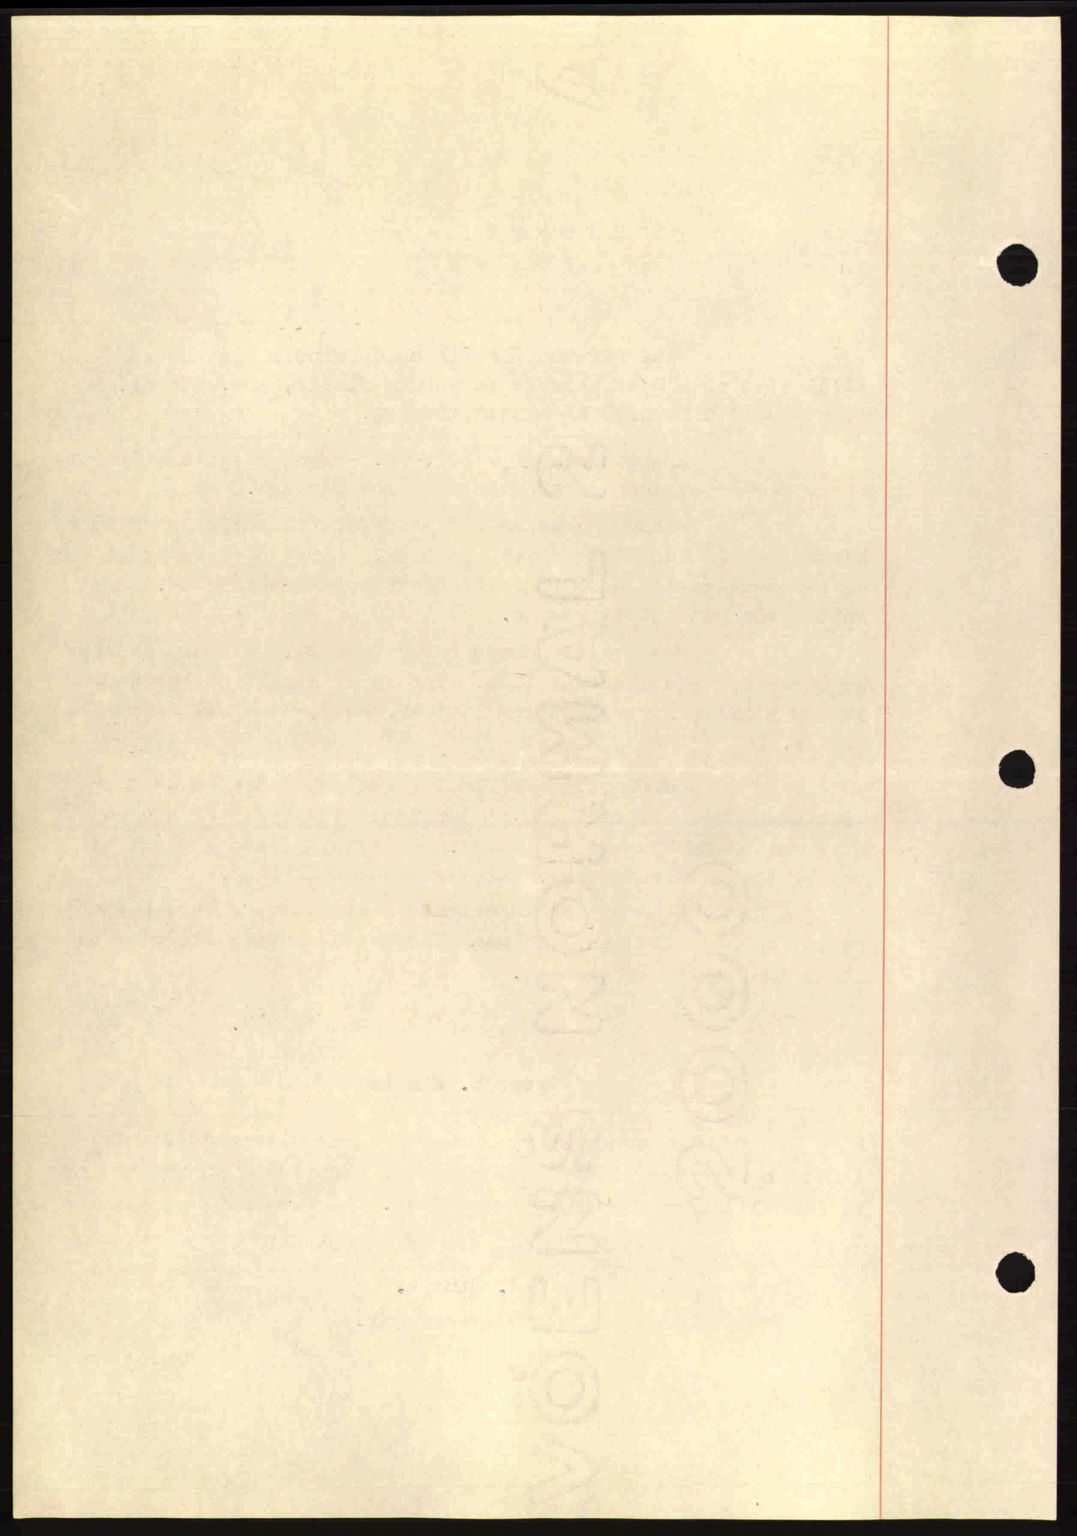 Indre Sogn tingrett, SAB/A-3301/1/G/Gb/Gba/L0030: Mortgage book no. 30, 1935-1937, Deed date: 24.02.1937